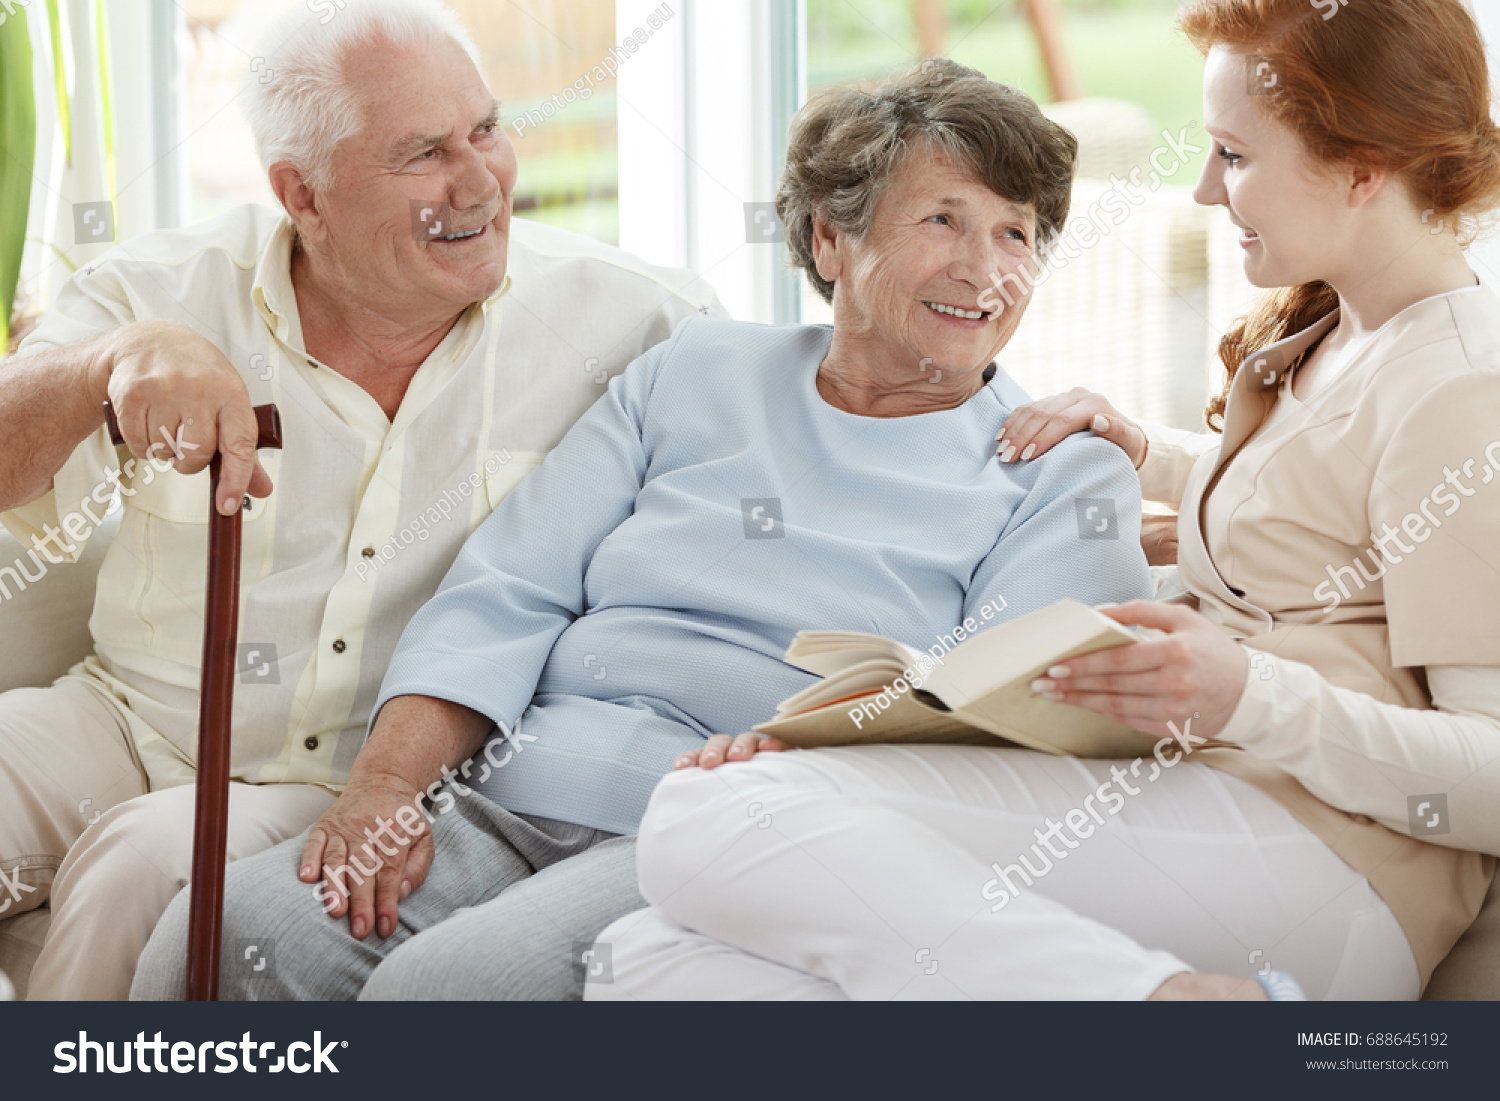 Two elder people are looking at smiling nurse who reads book in common room #688645192